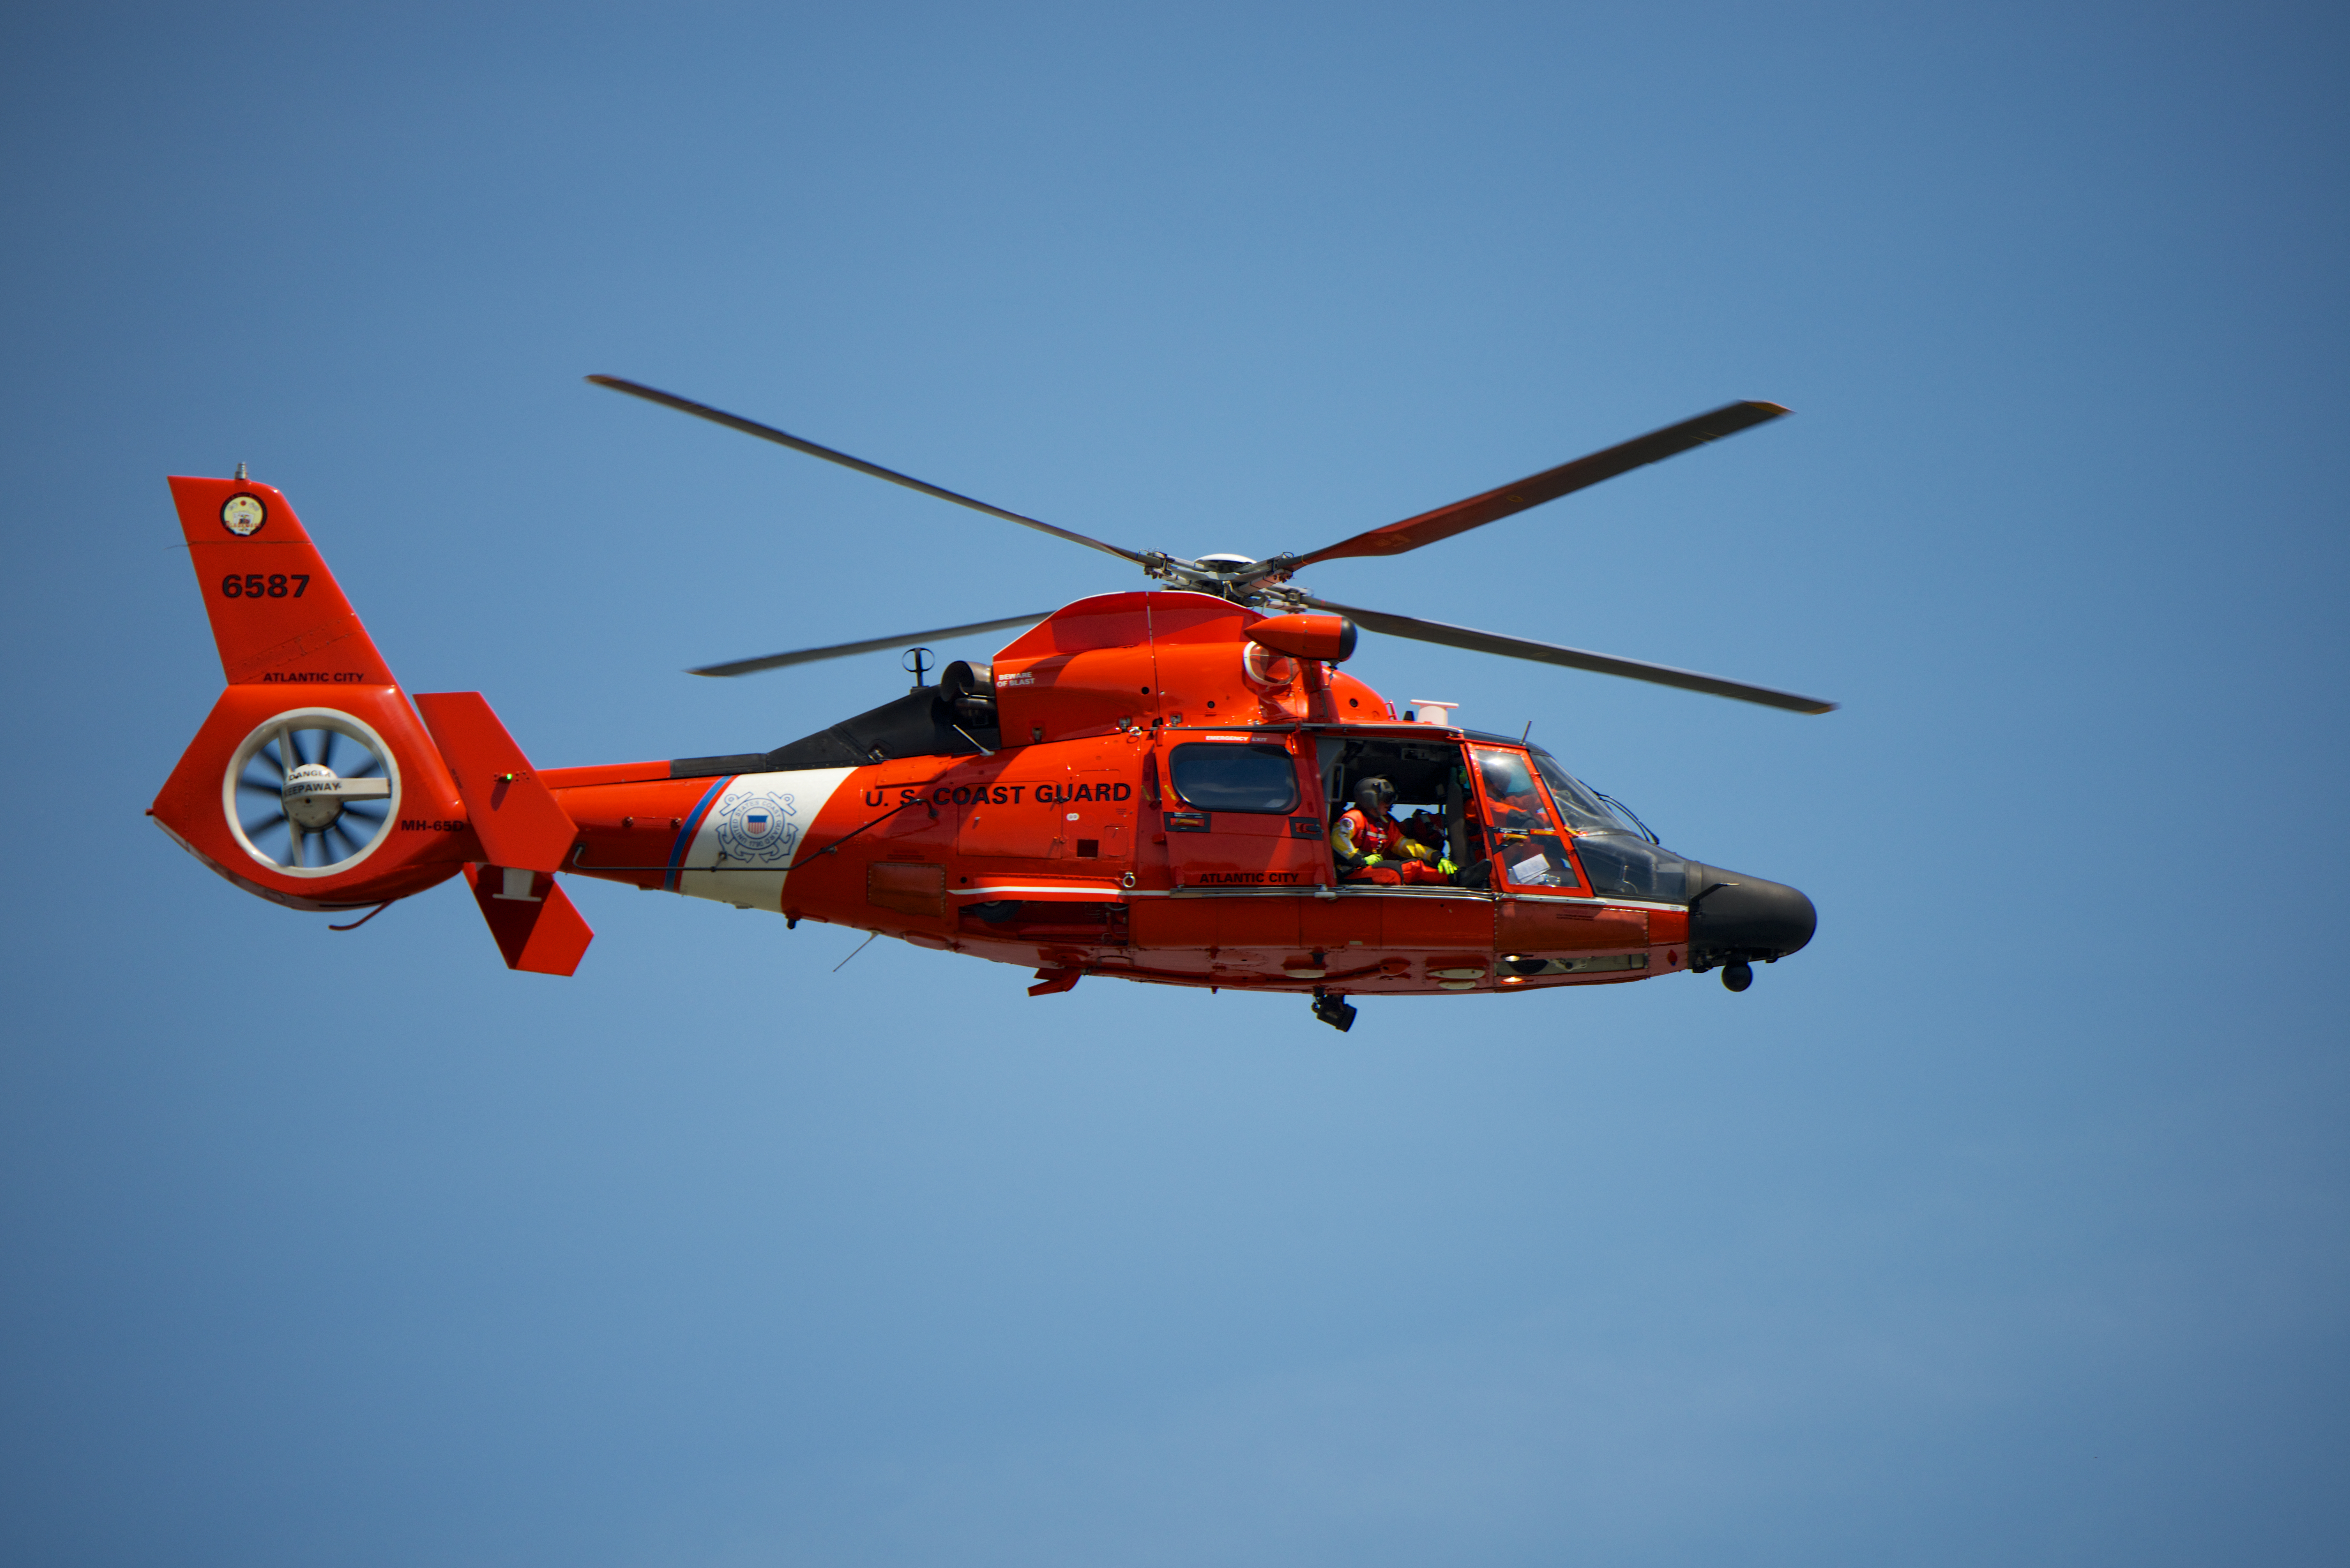 Coast guard helicopter photo